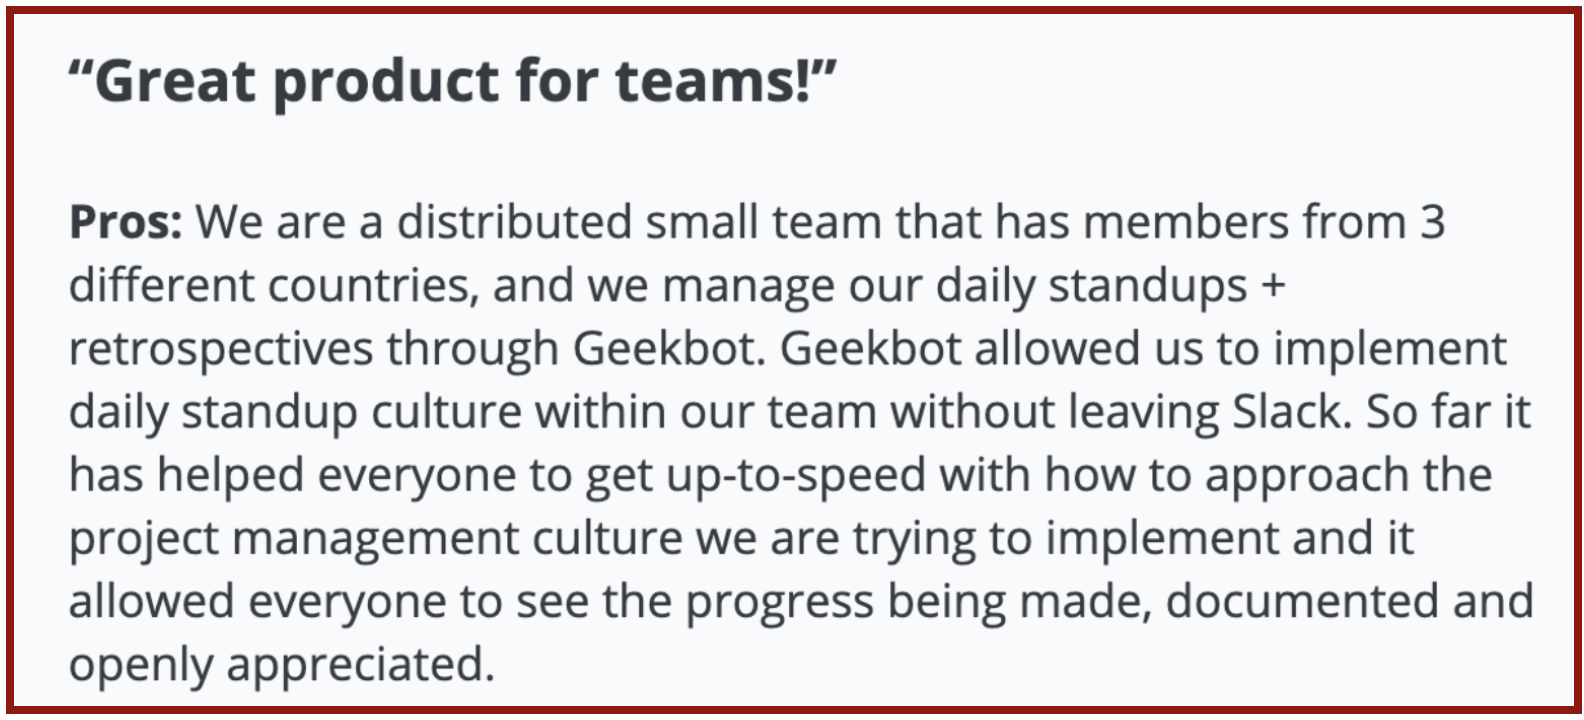 Geekbot reviews on Capterra: "Great product for teams!"